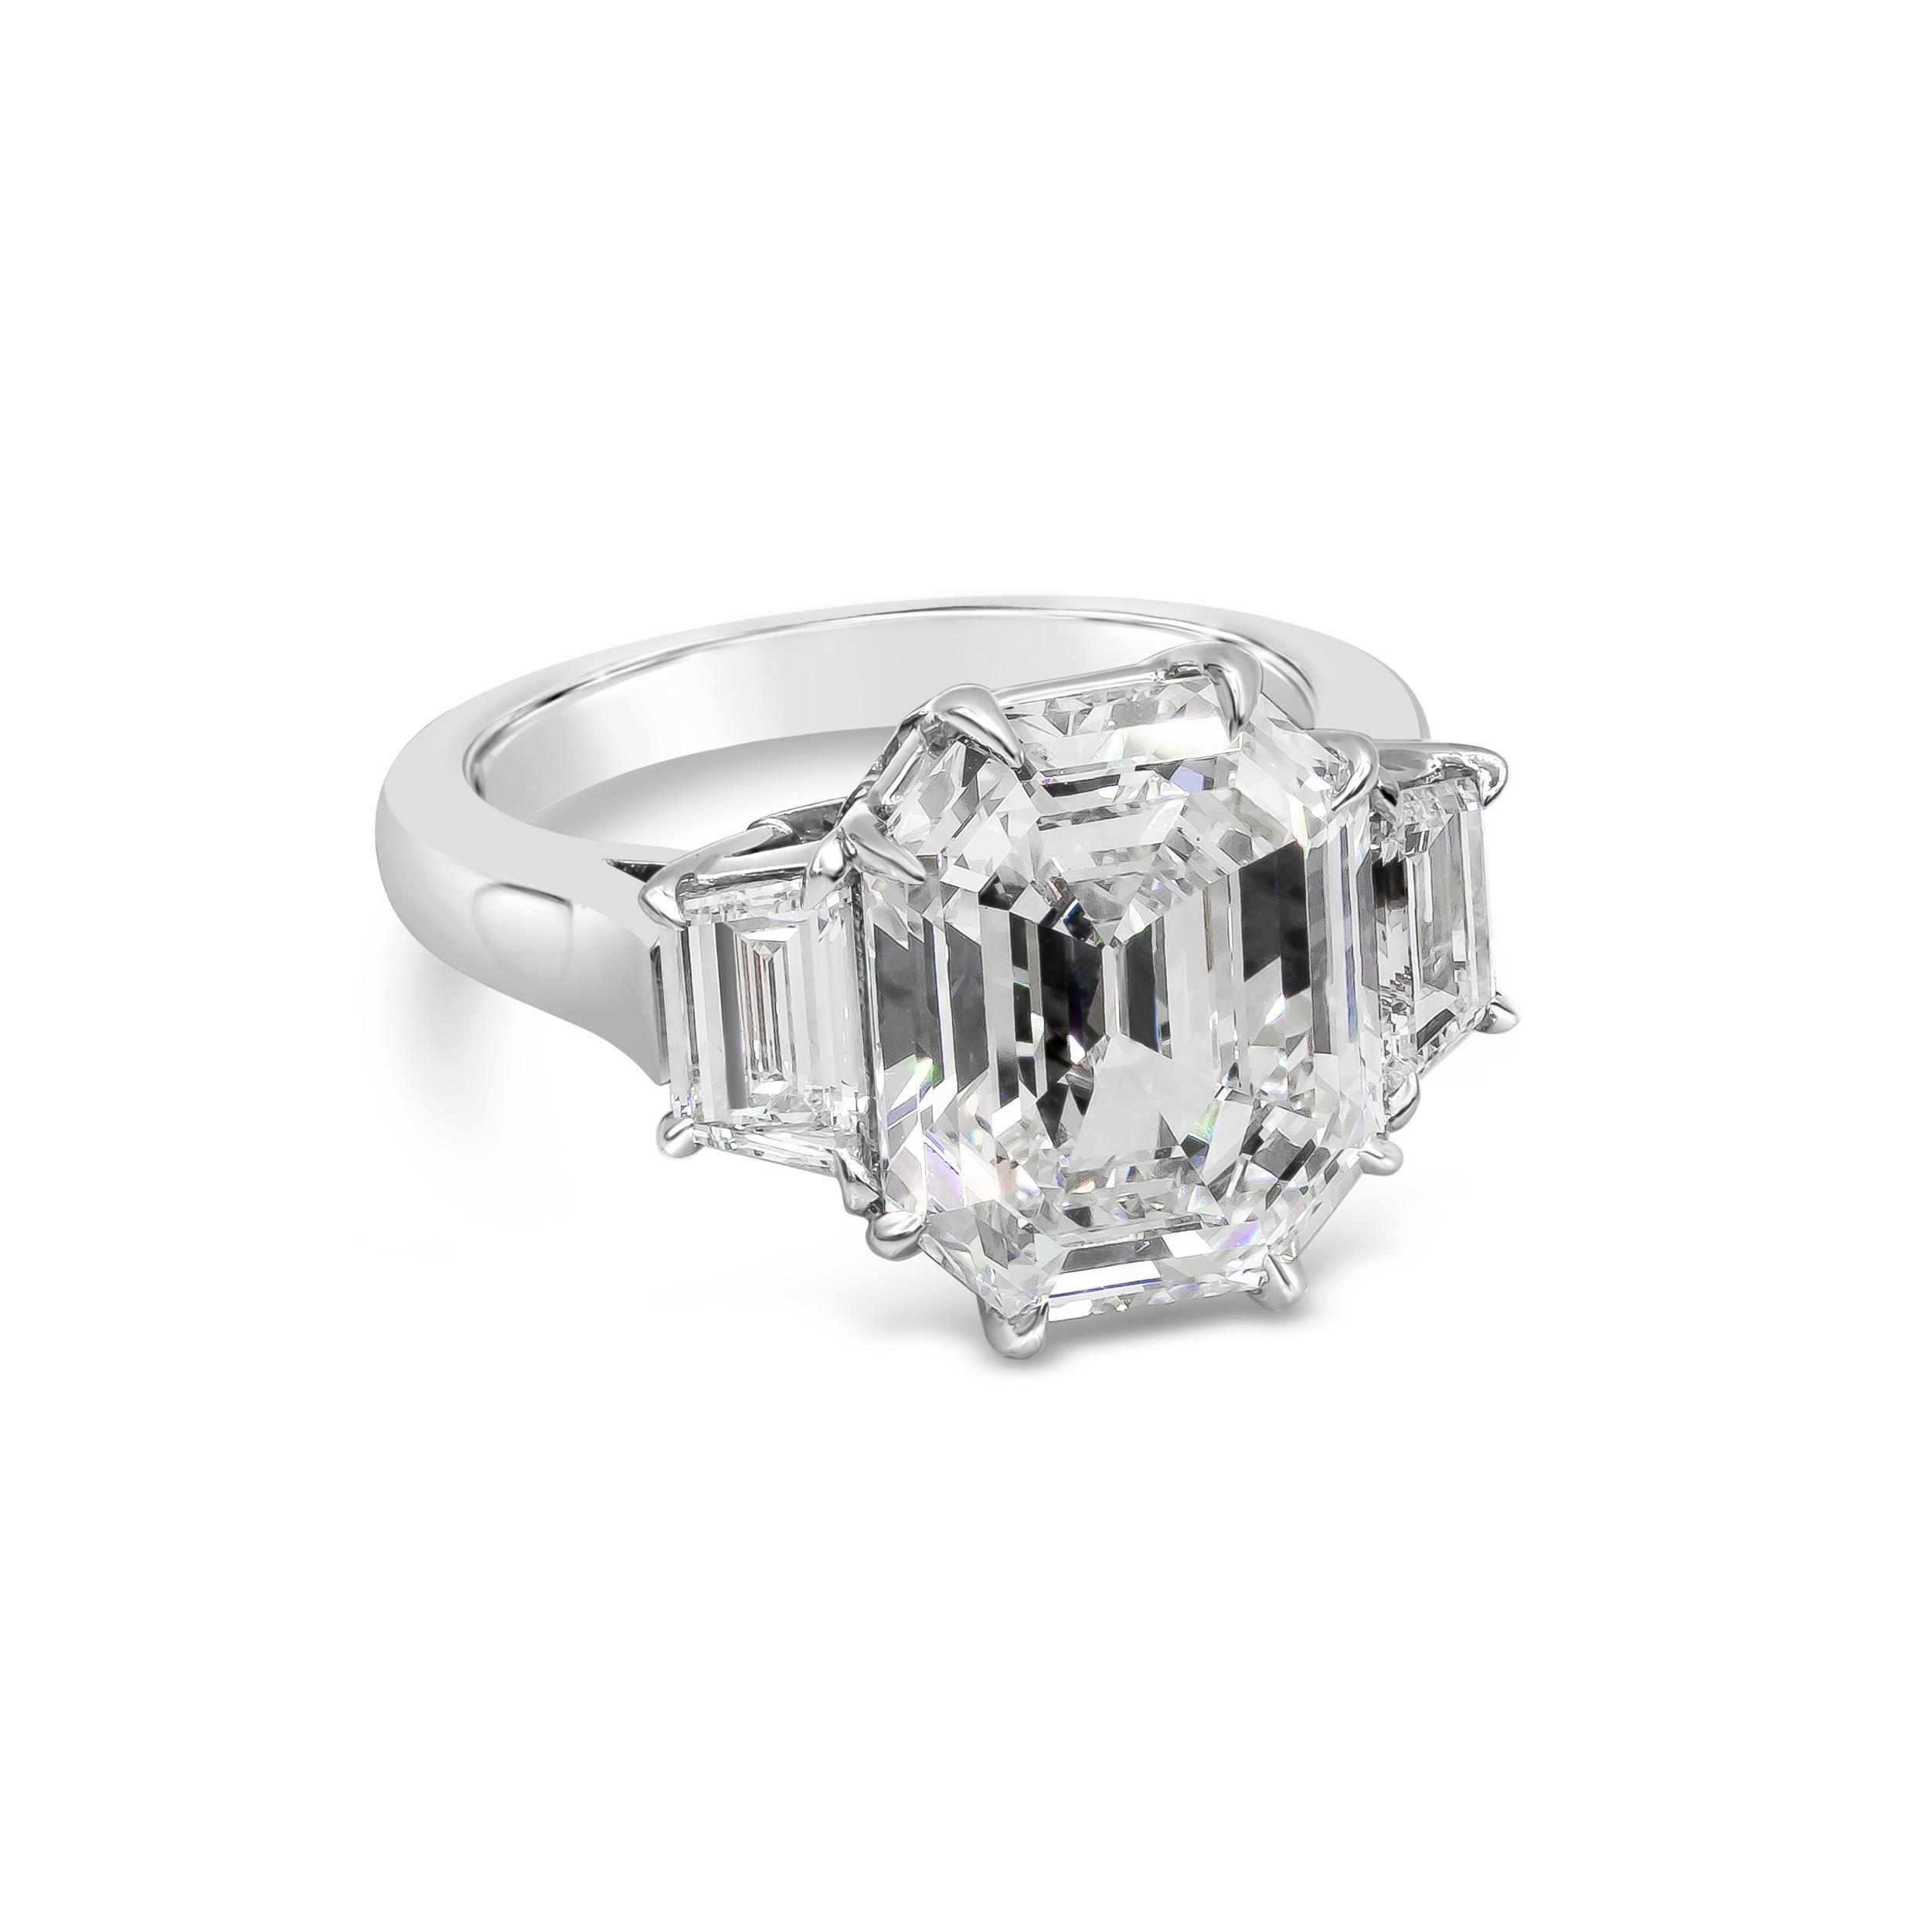 An elegant and unique GIA certified octagon shaped step cut diamond weighing 6.08 carats, set in an eight prong polished platinum basket and flanked by two trapezoid diamonds. Center stone is I color and VS2 clarity. Size 6 US, resizable upon